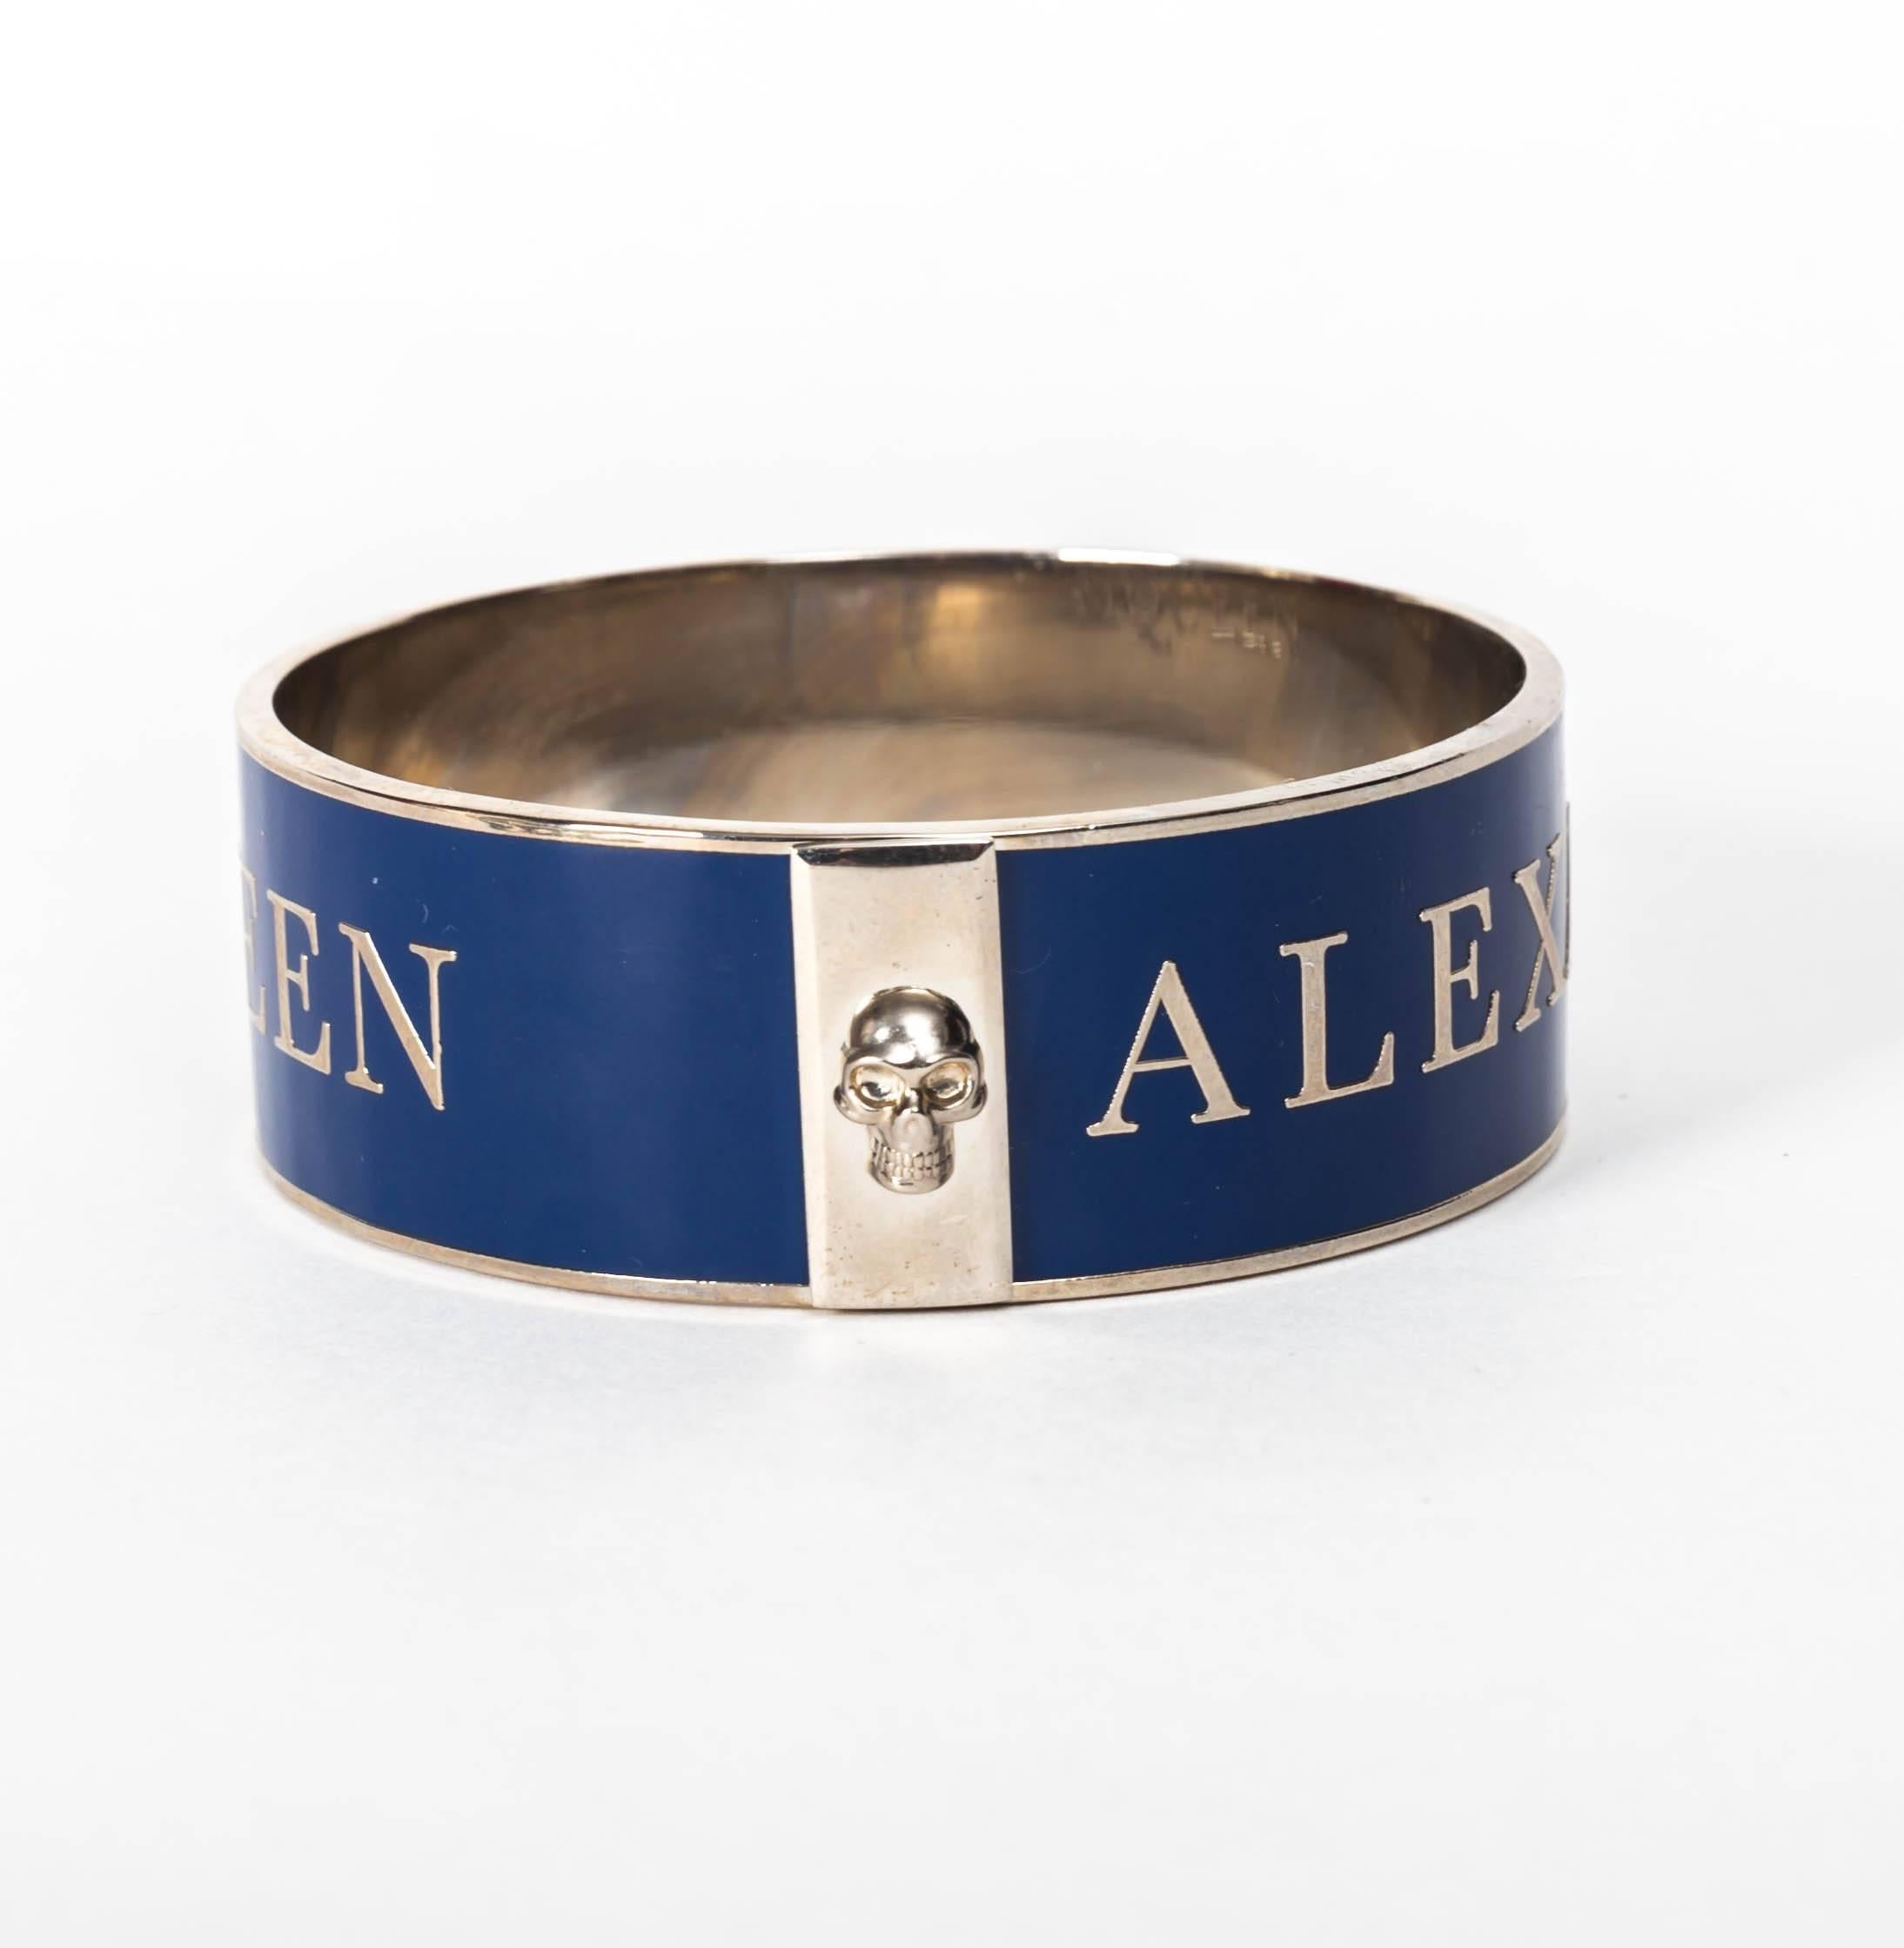 Alexander McQueen Cuff in Navy Blue With Raised Silver Lettering 1